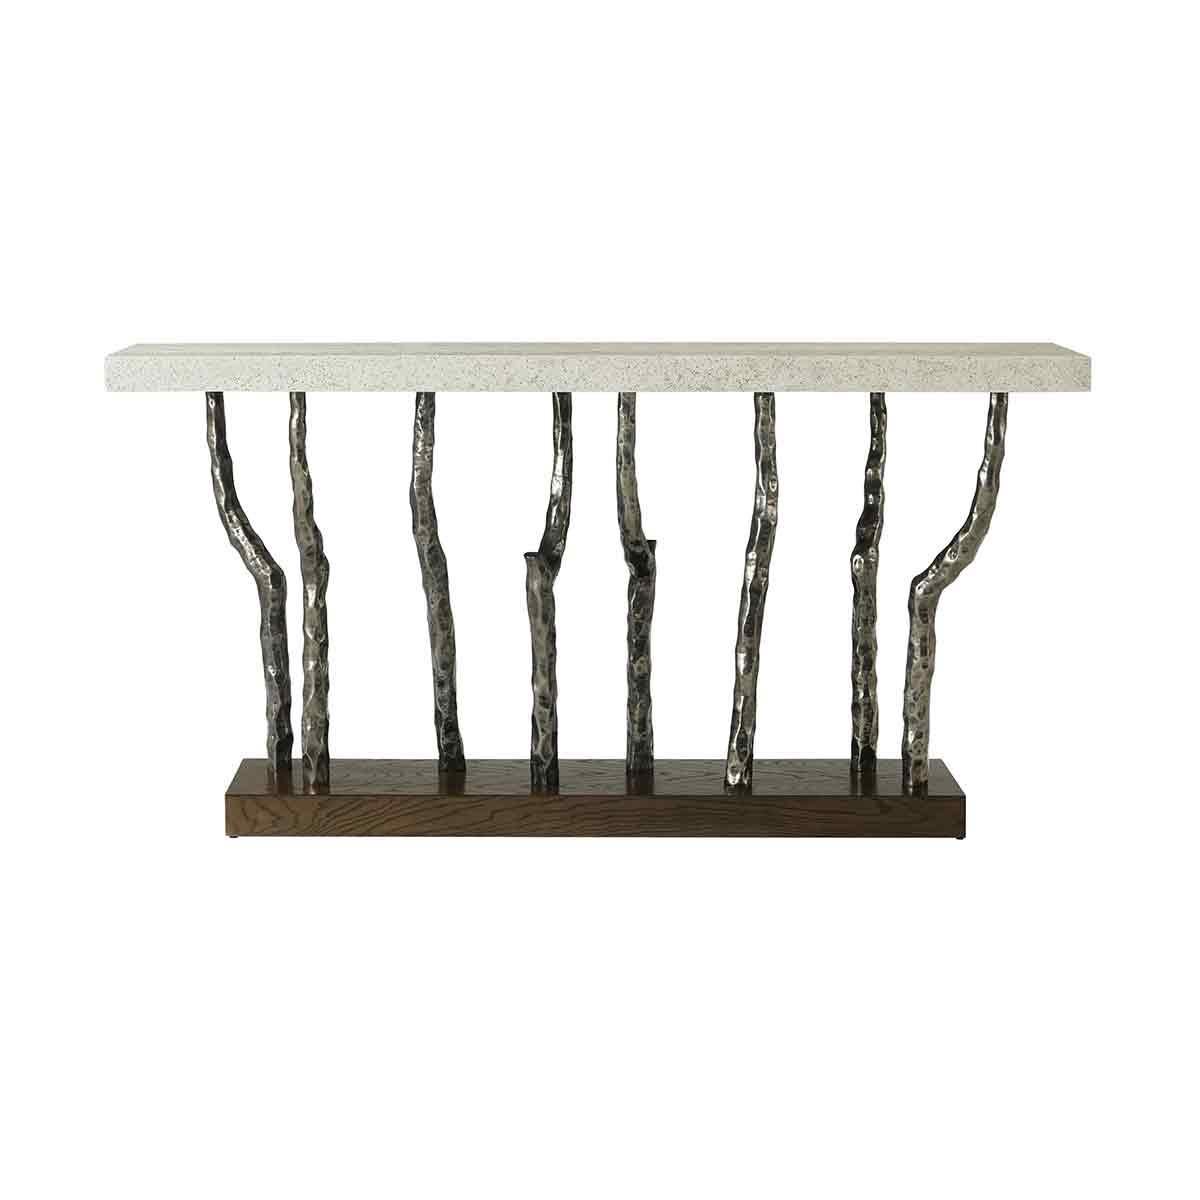 Modern Console Table - Dark finish, a contemporary console table made of figured ash available in dark earth finish with cast metal legs in our Volcanic finish and done with our stone-like porous Mineral Finish at the top.

Dimensions: 68